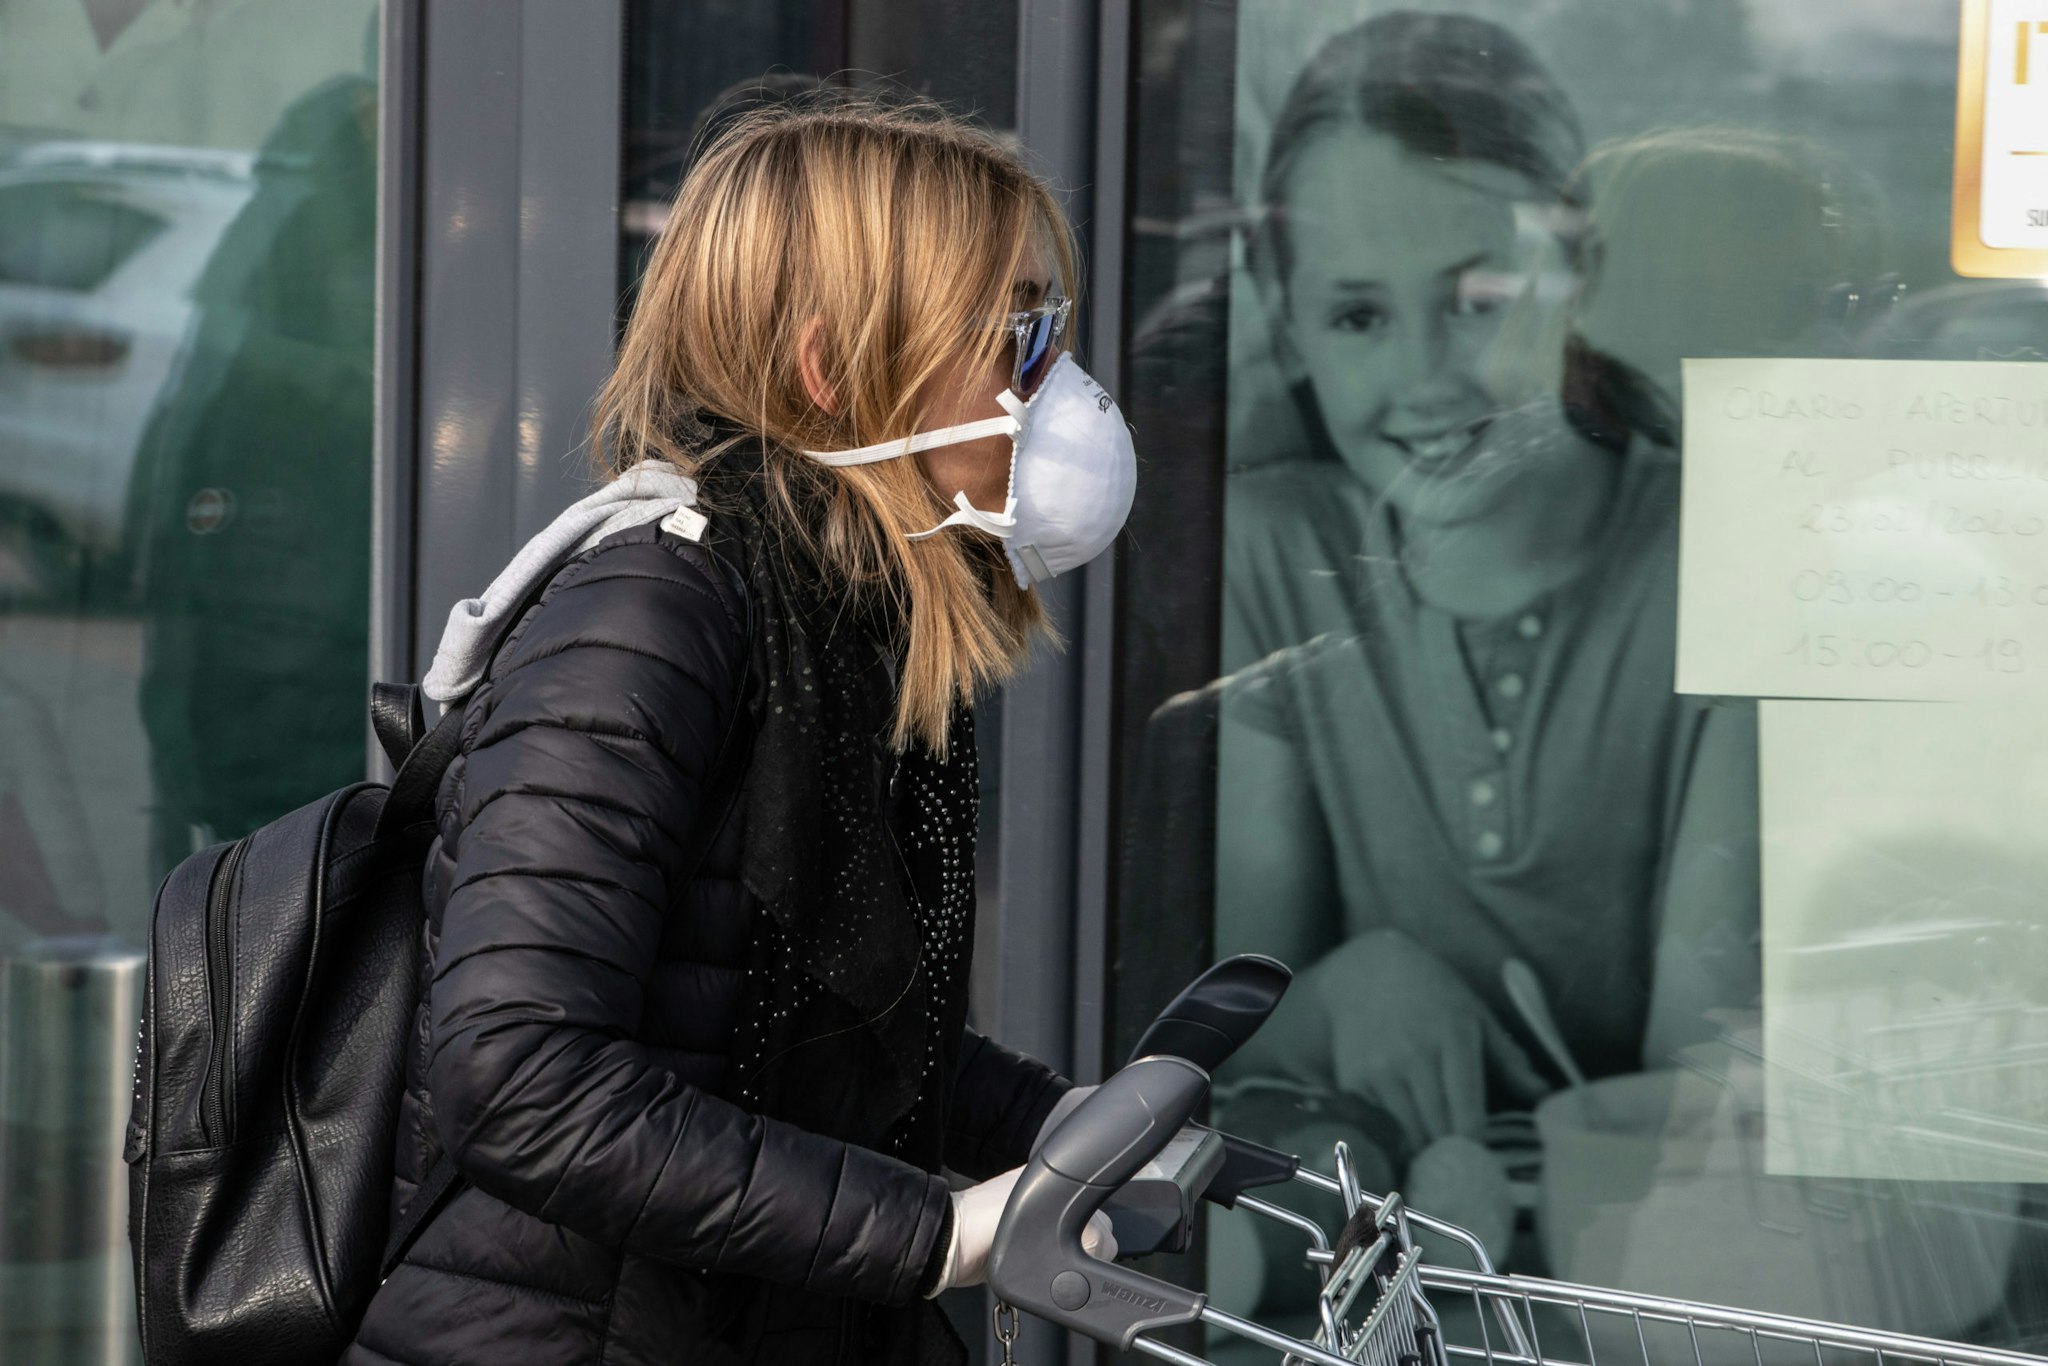 CASALPUSTERLENGO, ITALY - FEBRUARY 23: People wearing respiratory masks wait to be given a 10-minutes access to shop in a LIDL supermarket in groups of twenty people on February 23, 2020 in Casalpusterlengo, south-west Milan, Italy. Casalpusterlengo is one of the ten small towns placed under lockdown earlier this morning as a second death from coronavirus sparked fears throughout the Lombardy region. (Photo by Emanuele Cremaschi/Getty Images)